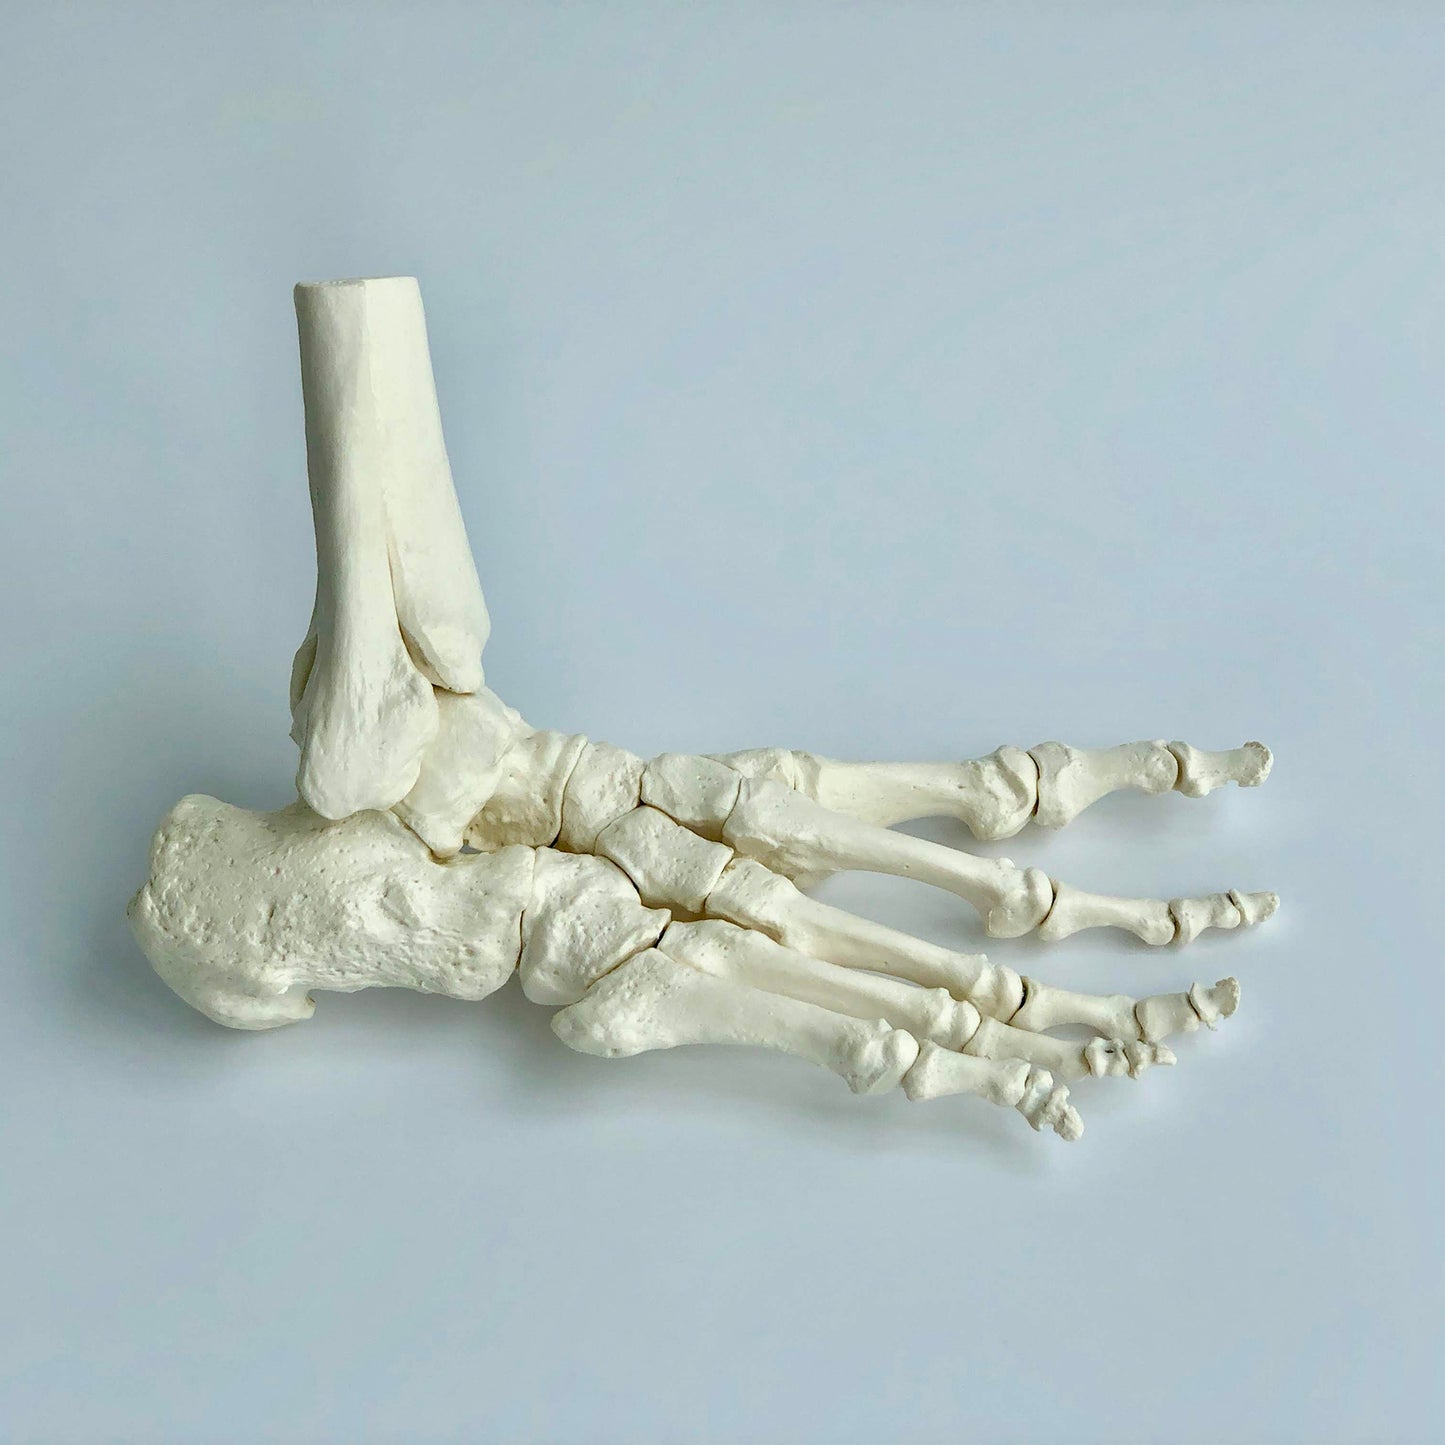 Model of the skeleton of the foot and a bit of the tibia and calf. All the bones can be separated